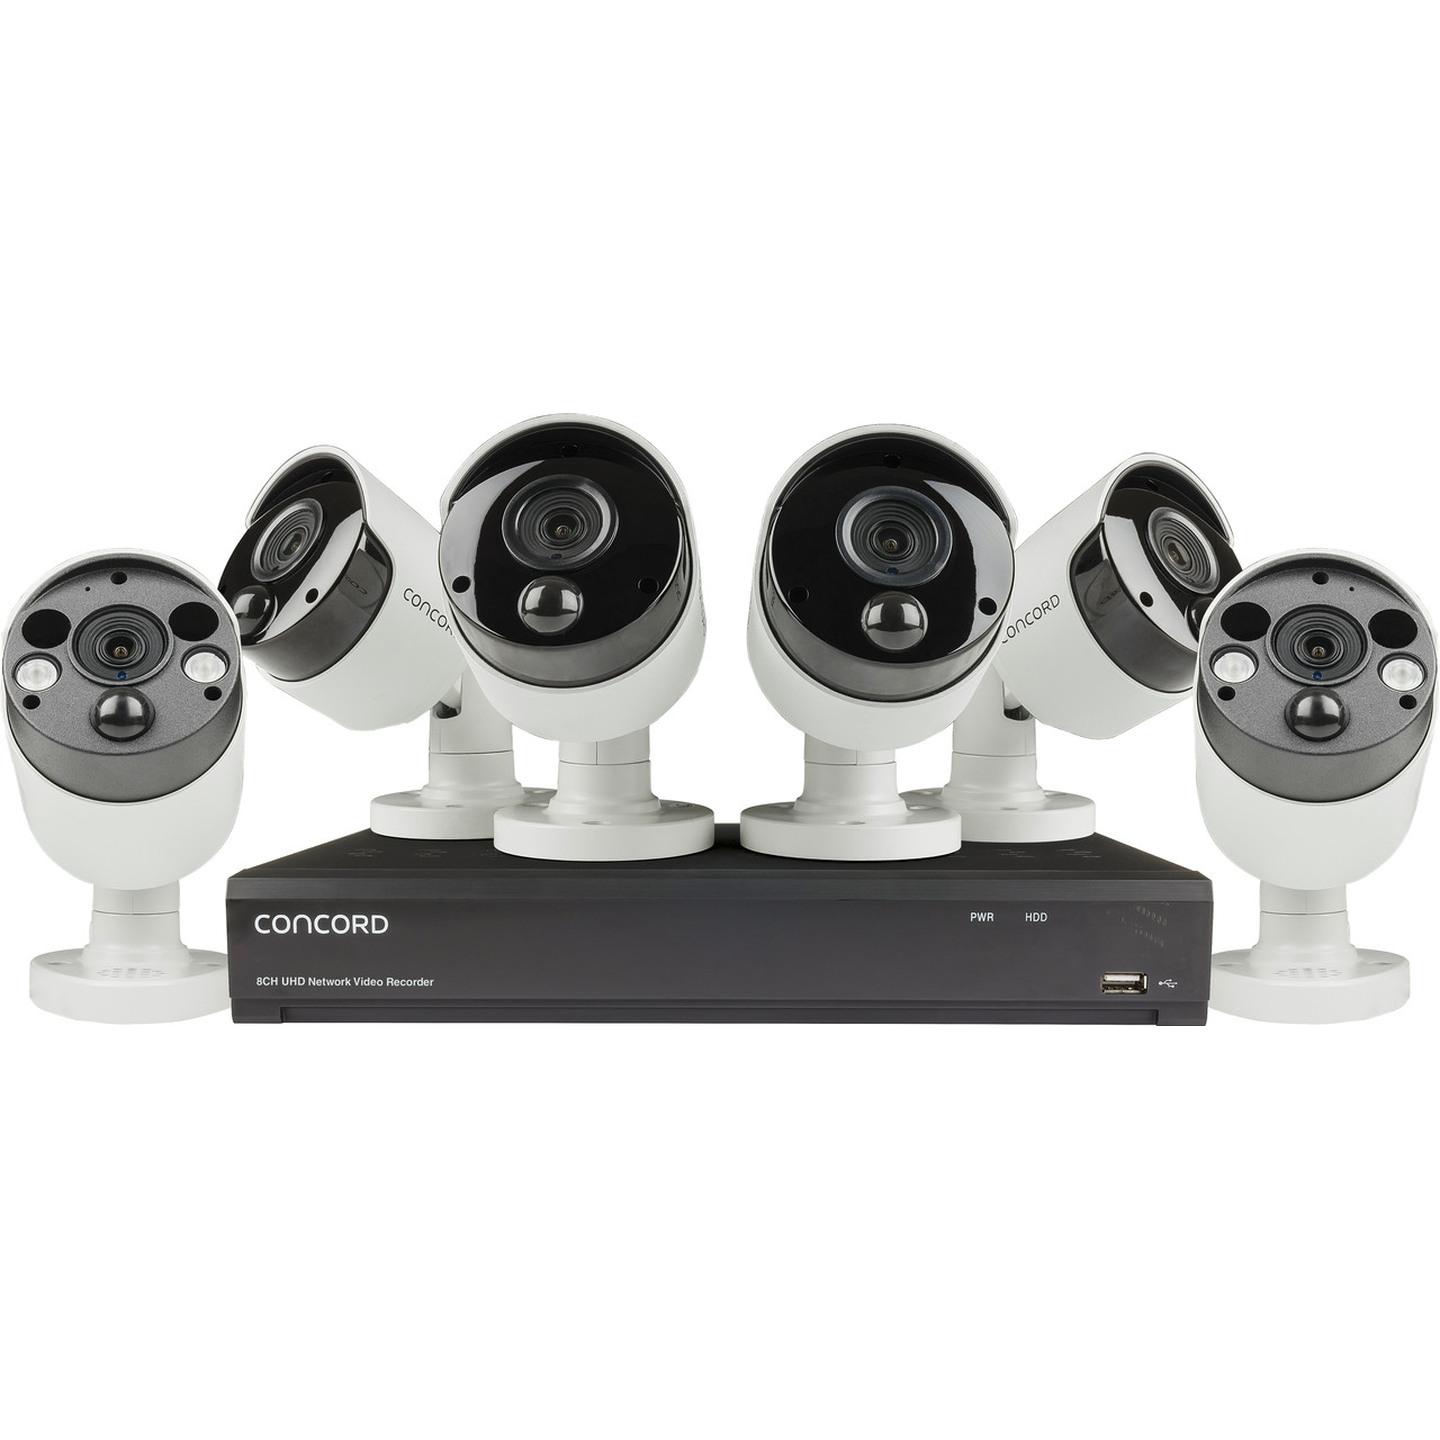 Concord 8 Channel 4K NVR Package - 4x4K PIR IP Cameras and 2x4K PIR IP Floodlight Cameras with 2 way audio